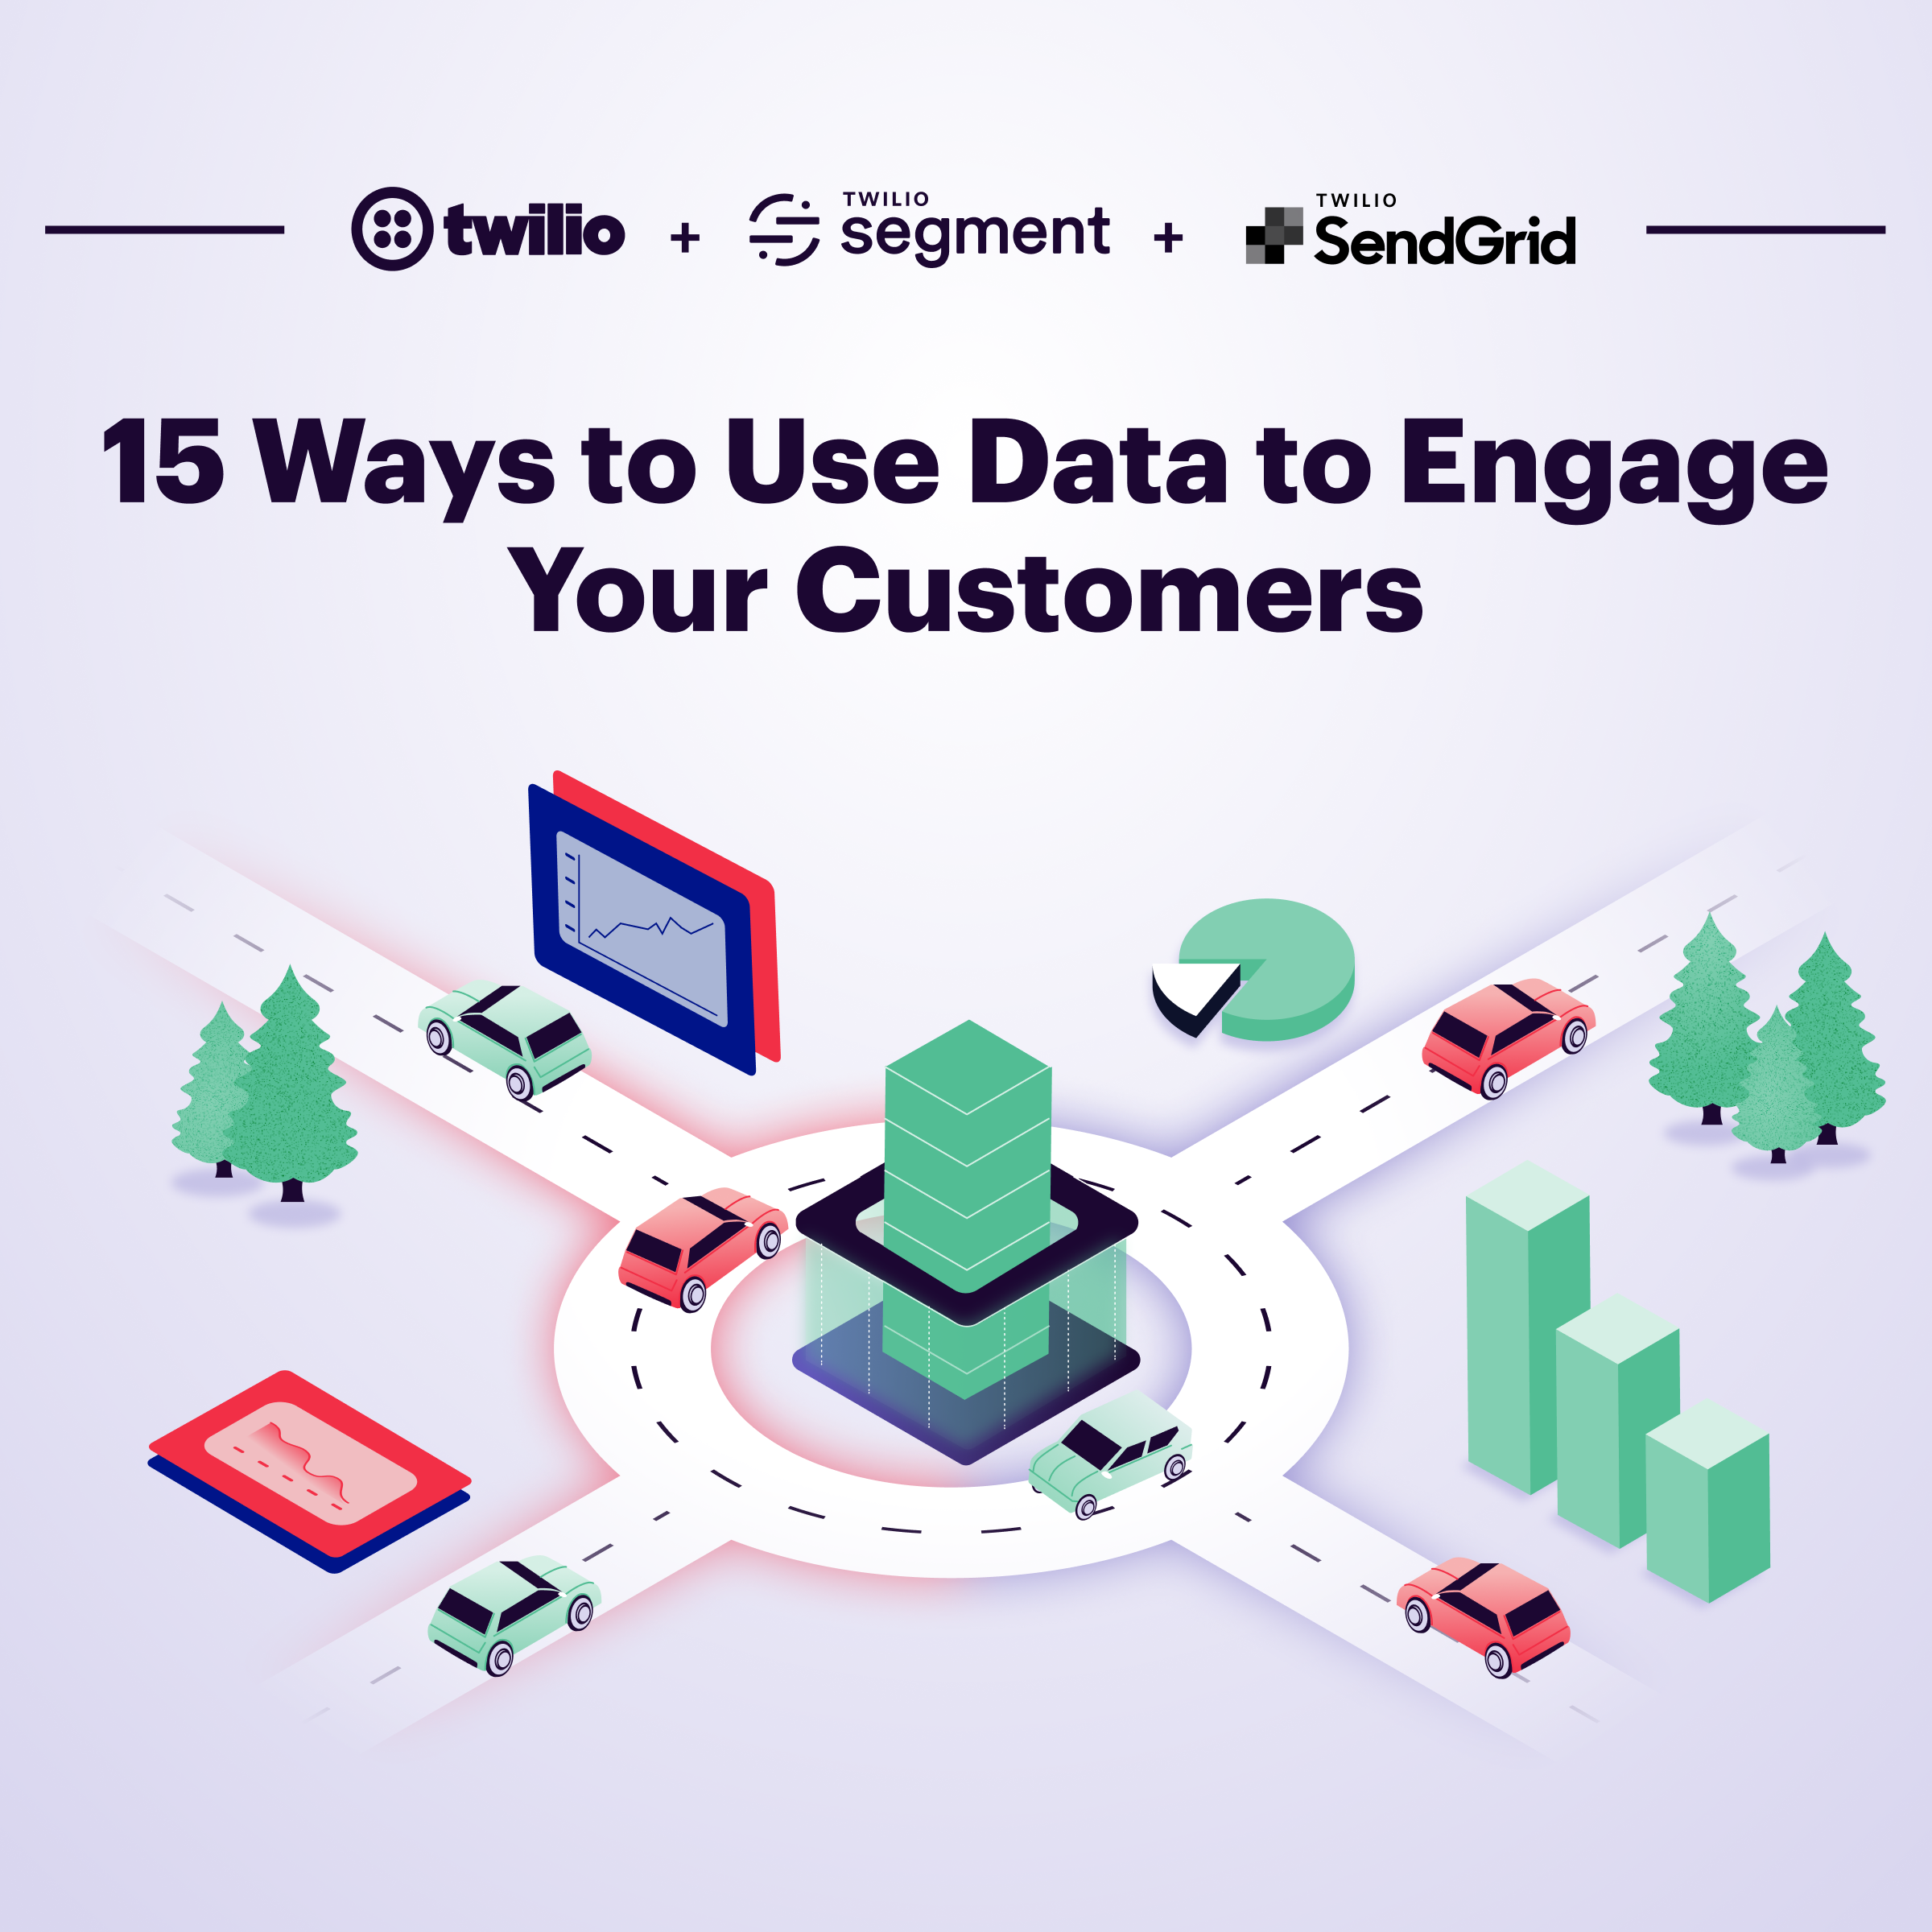 Guide 15 ways to use data to engage customers